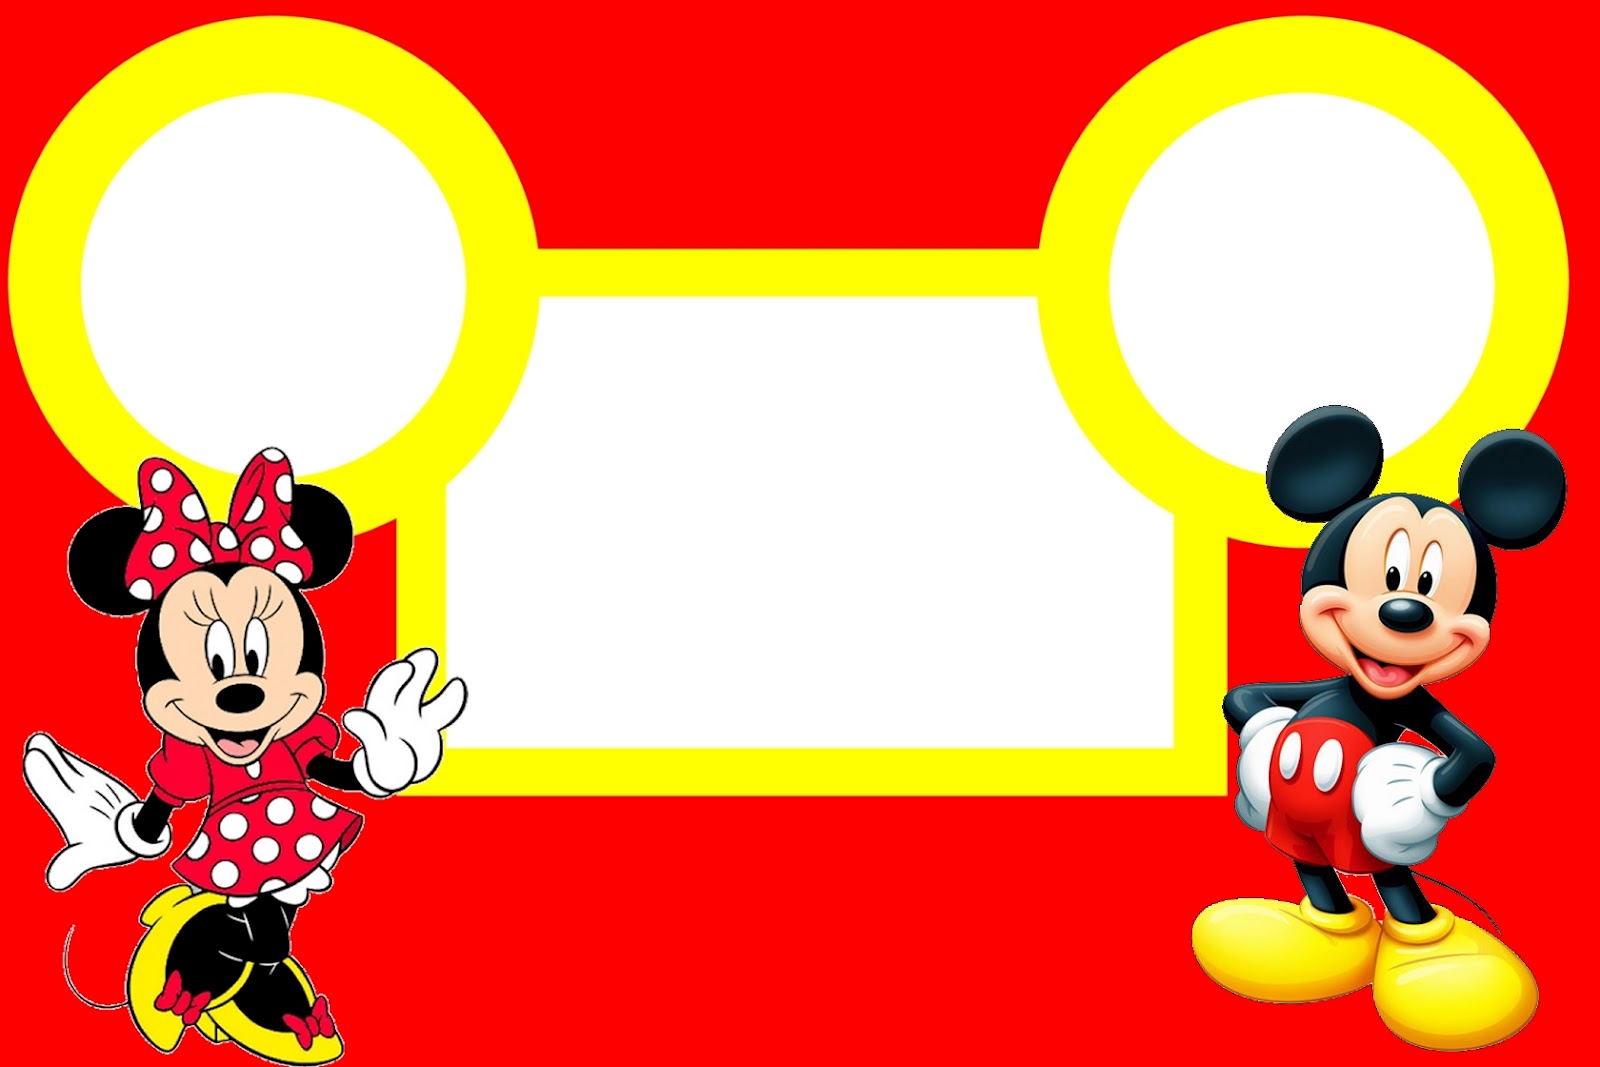 minnie-and-mickey-in-red-free-printable-birthday-invitations-oh-my